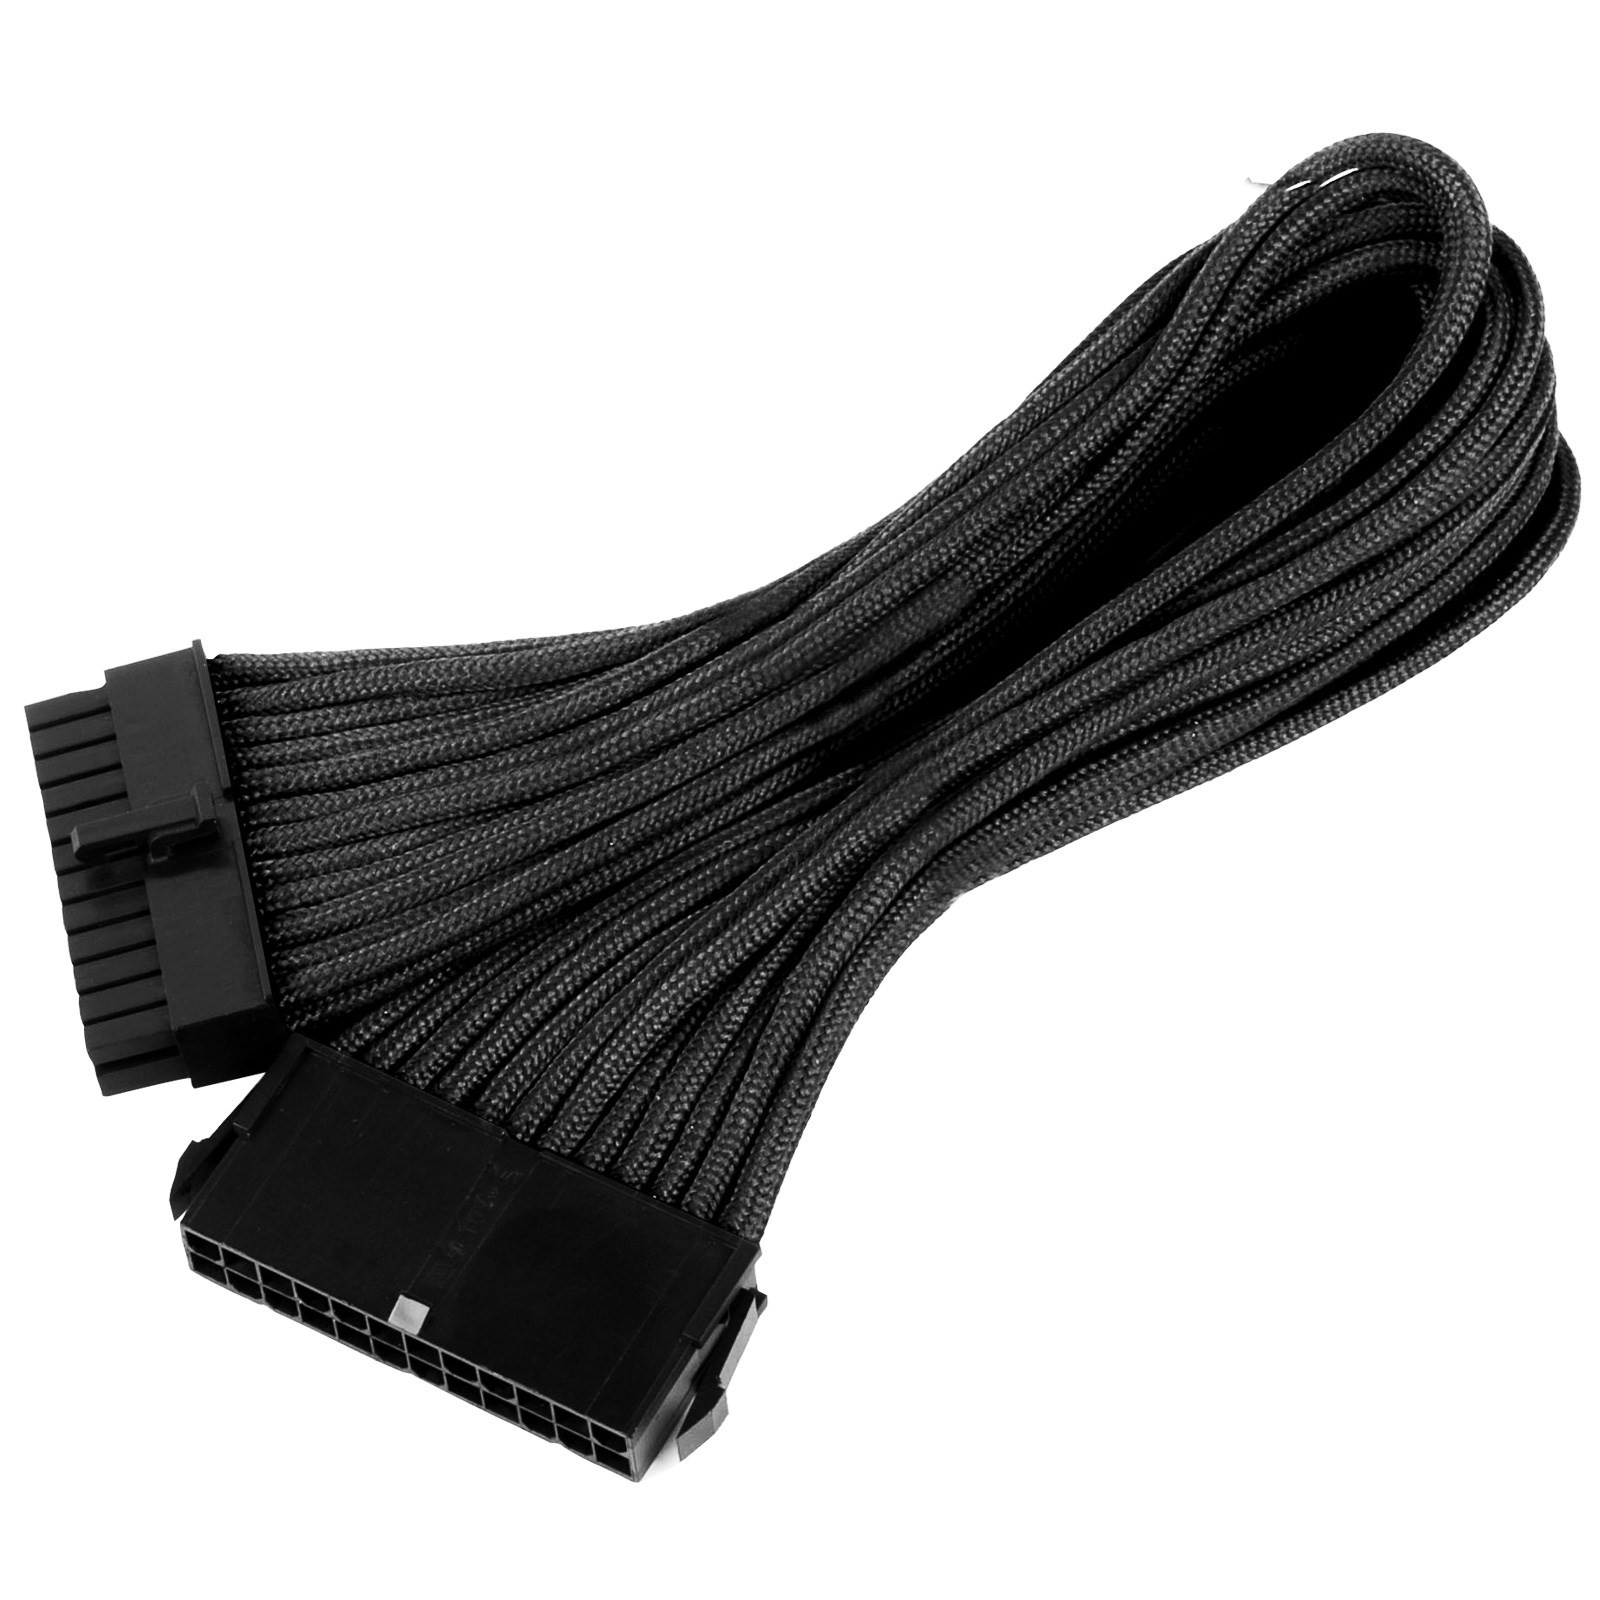 Photos - Cable (video, audio, USB) SilverStone PP07-MBB 24-pin ATX 300mm Extension Cable Sleeved in Black SST 